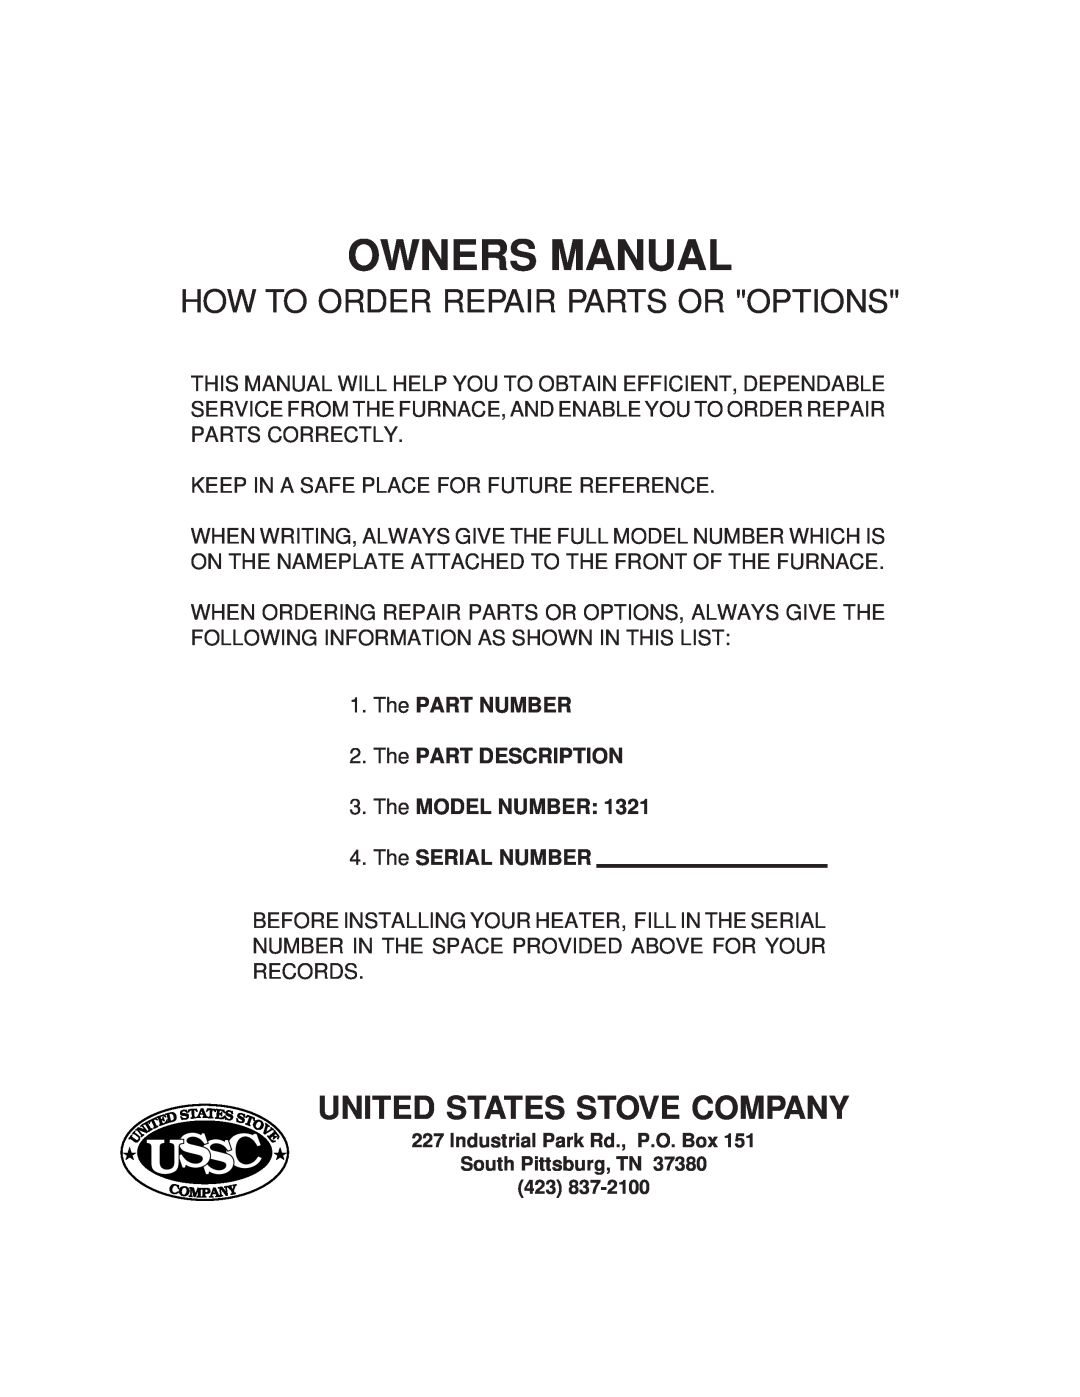 United States Stove 1321 warranty United States Stove Company, Ussc, How To Order Repair Parts Or Options 